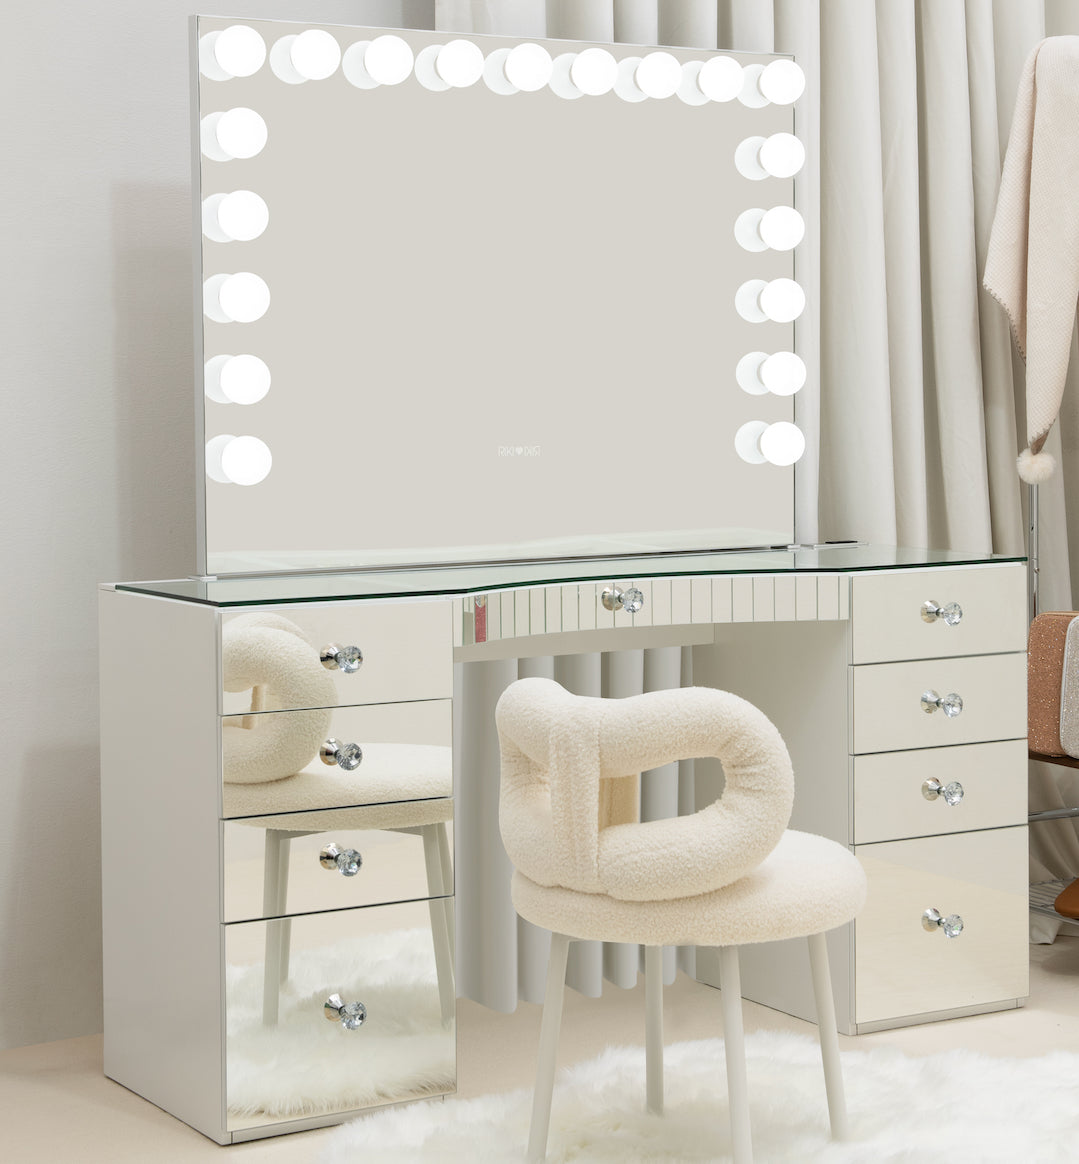 GLAMCOR mirrored Power Vanity pairs up with RIKI LOVES RIKI best luxury large LED holly wood style vanity mirror. Better than impressions vanity slaystation with lighted mirror